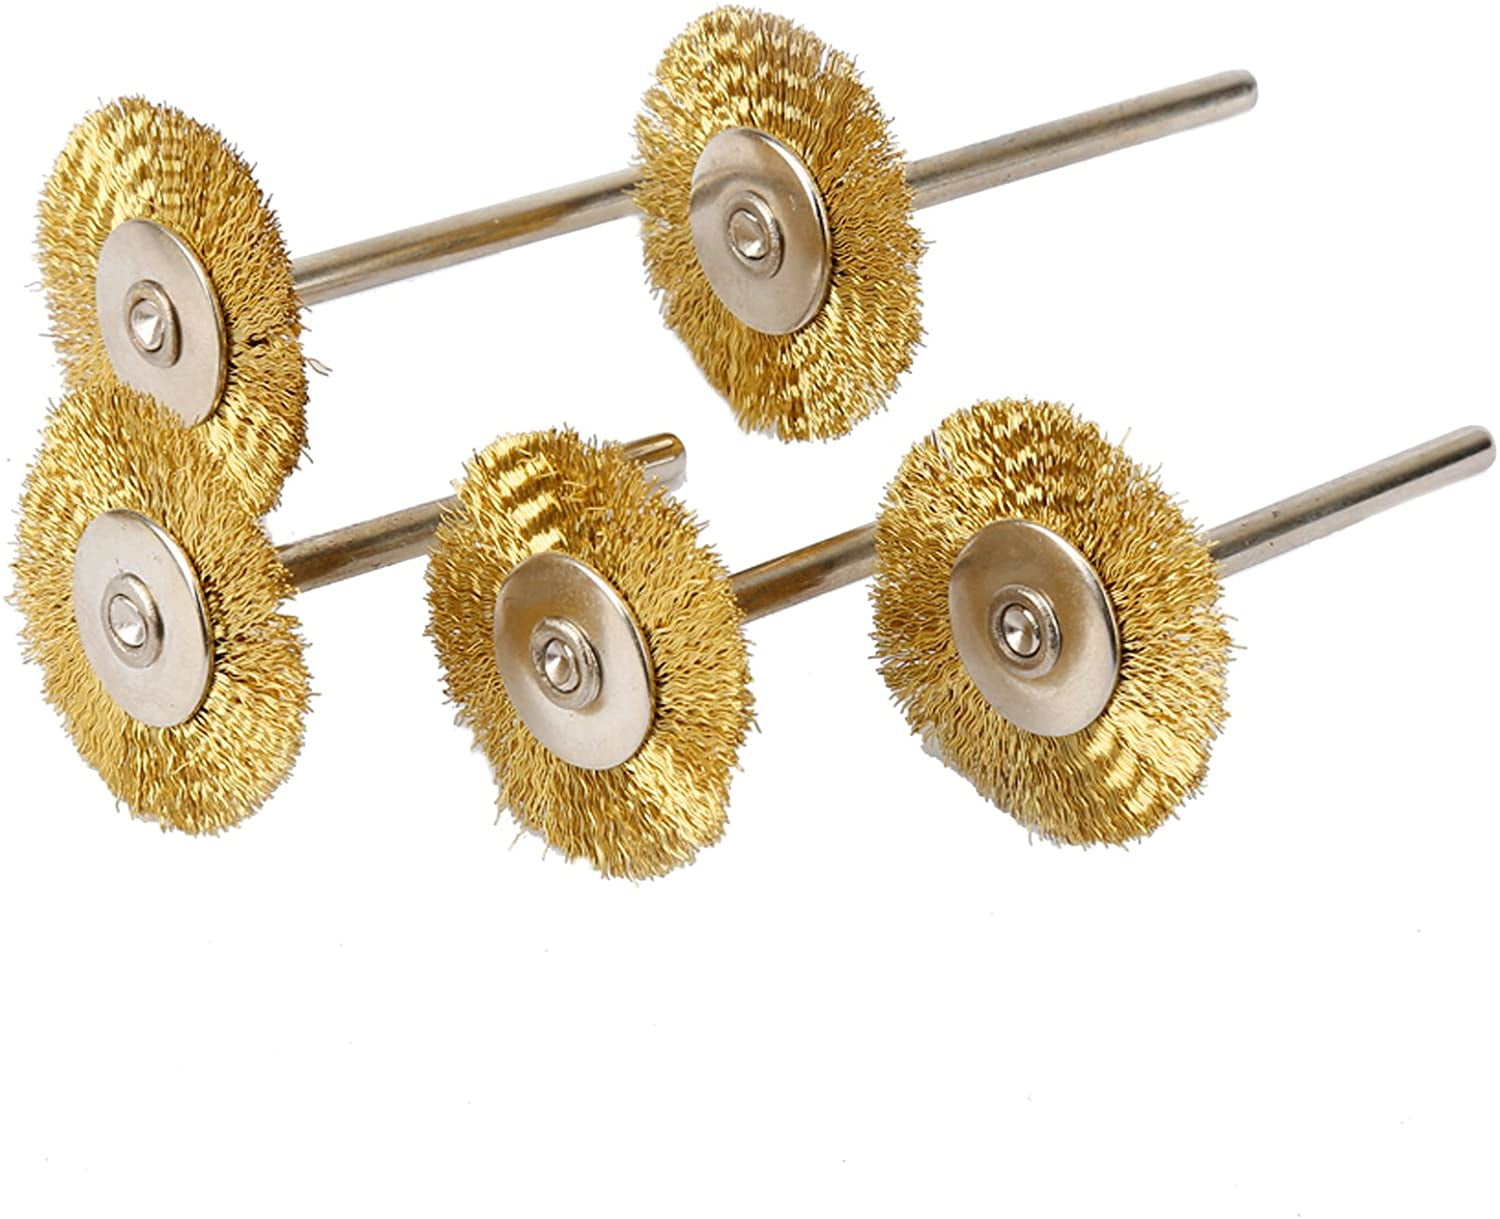 5Pcs Brass Wire Wheel Brushes Rust Remover Rotary Polish Power Die Grinder Tool 